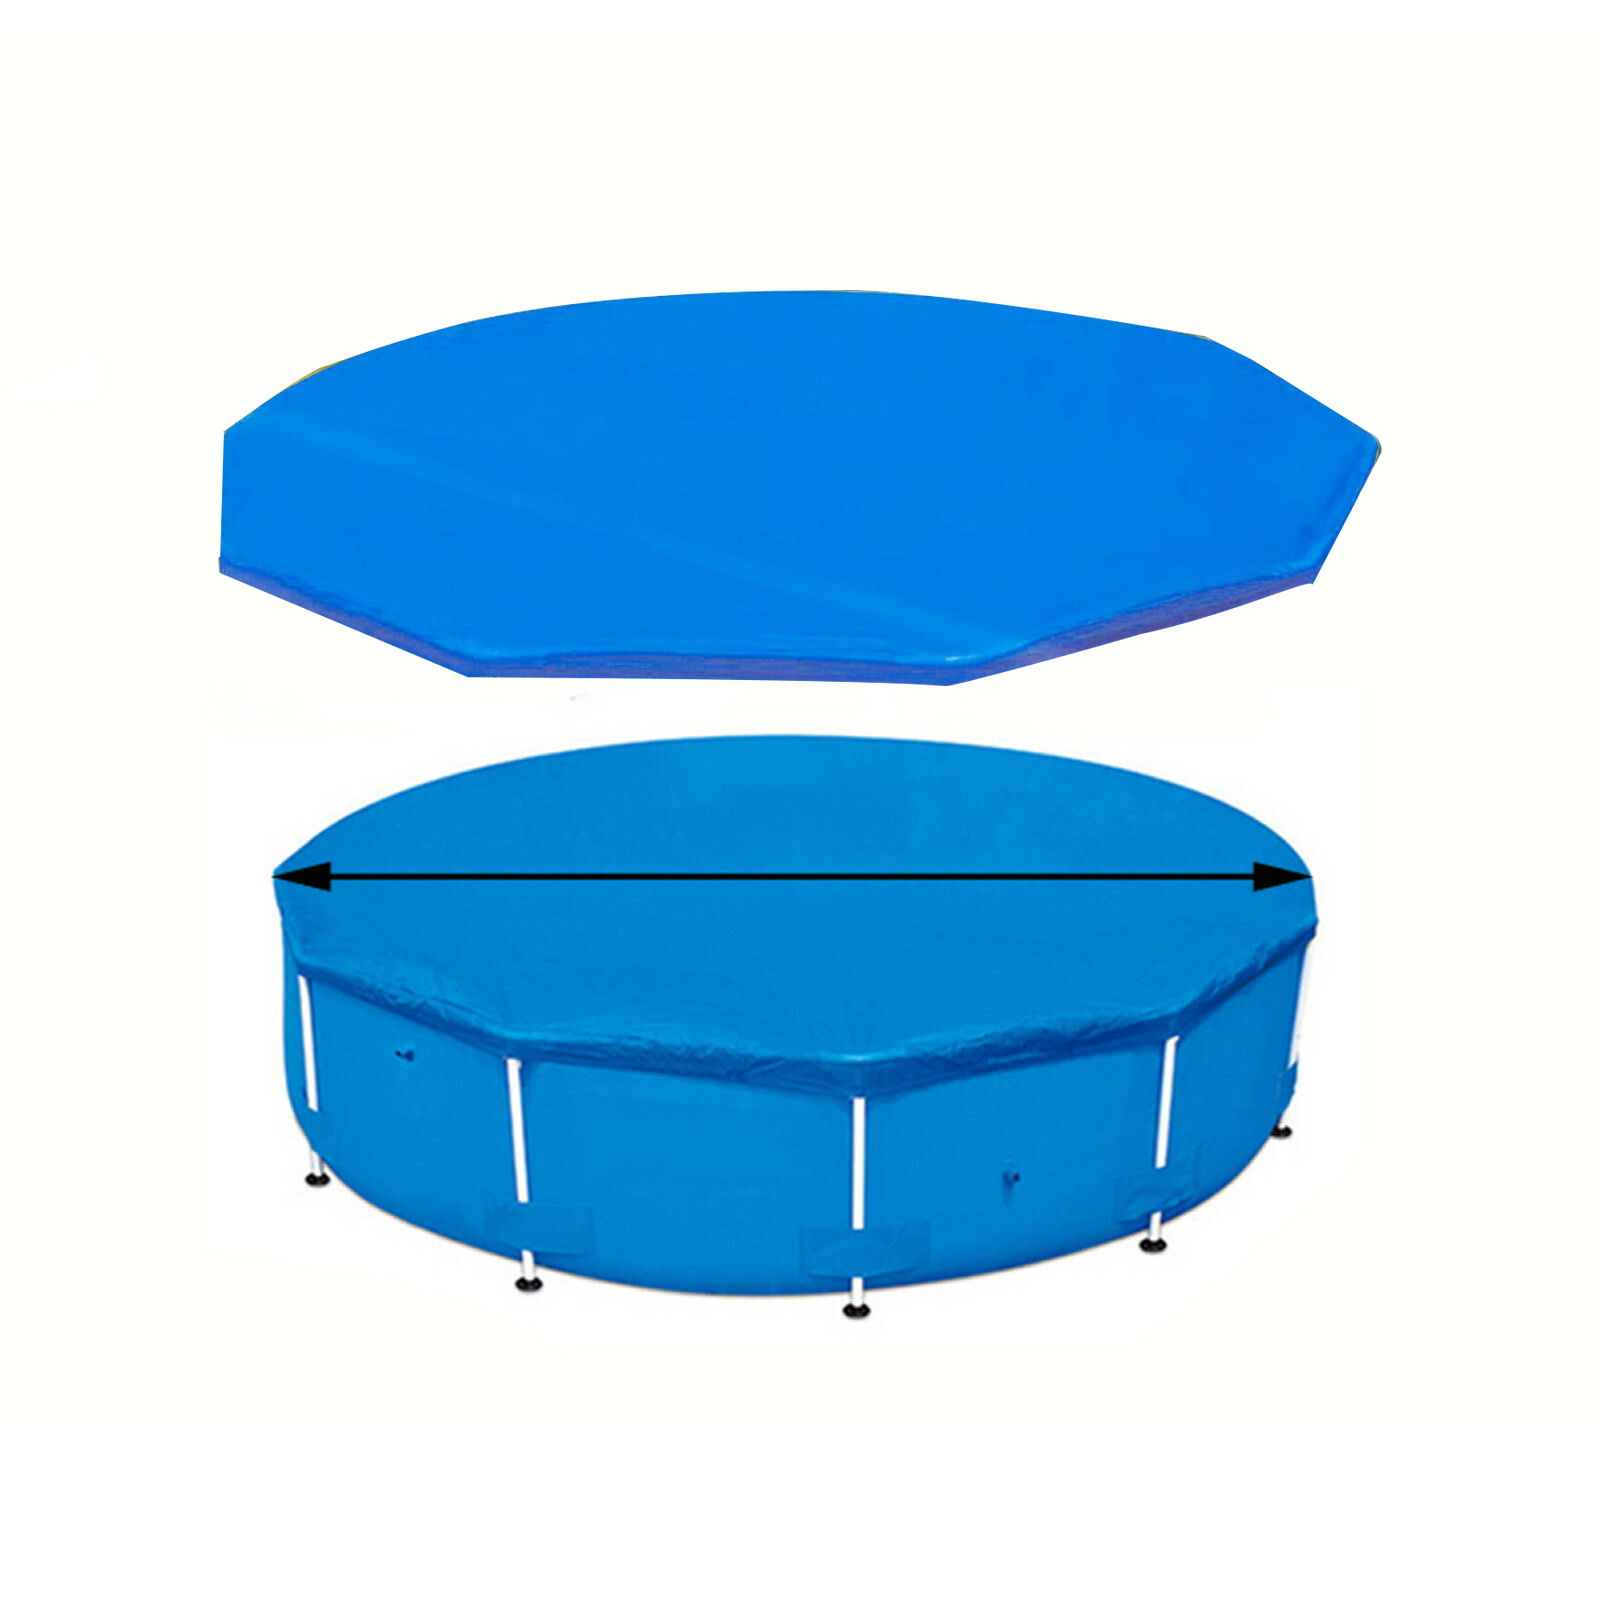 15ft-Inflatable-Swimming-Pool-Protective-Cover-Dustproof-Protection-Mat-For-Outdoor-Backyard-Garden-1718614-3